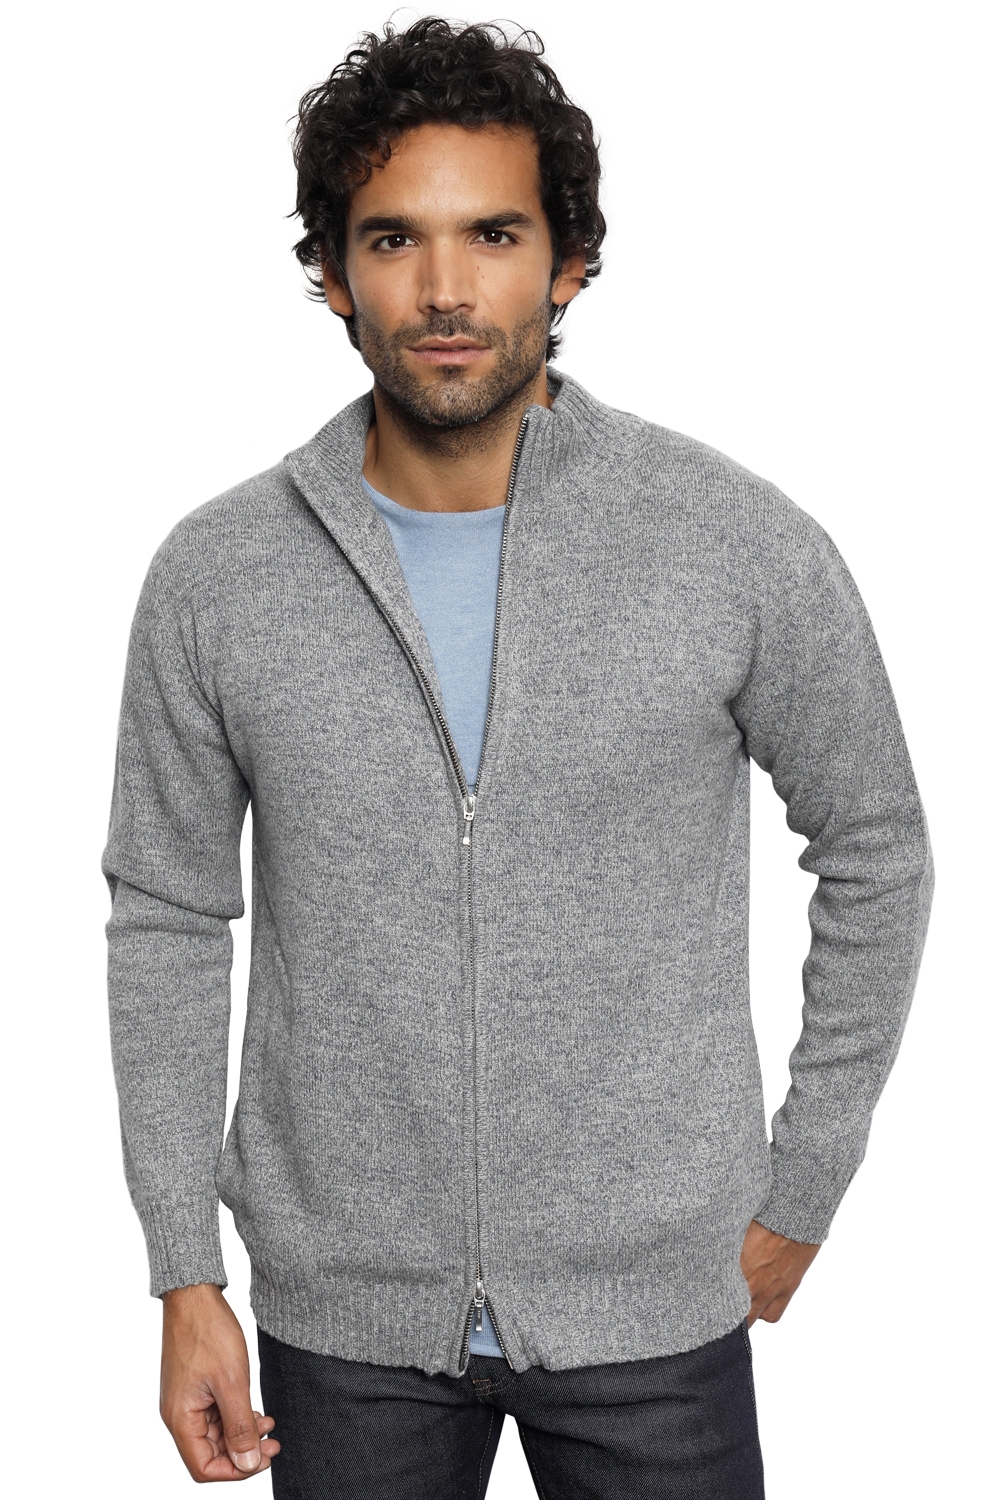 Chameau pull homme zip capuche clyde pierre s